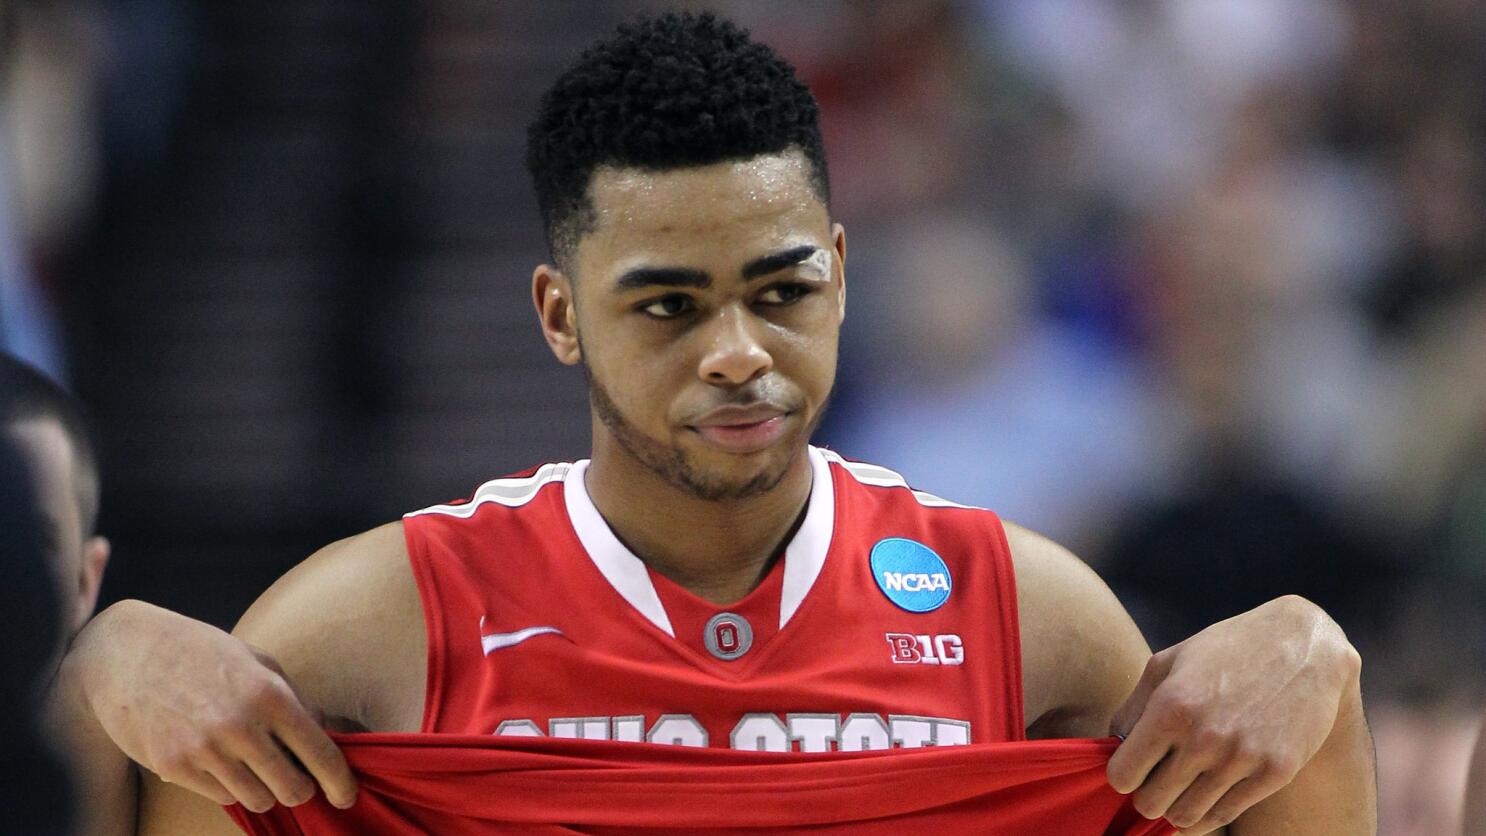 Ohio State Star D'Angelo Russell Drafted 2nd Overall by Los